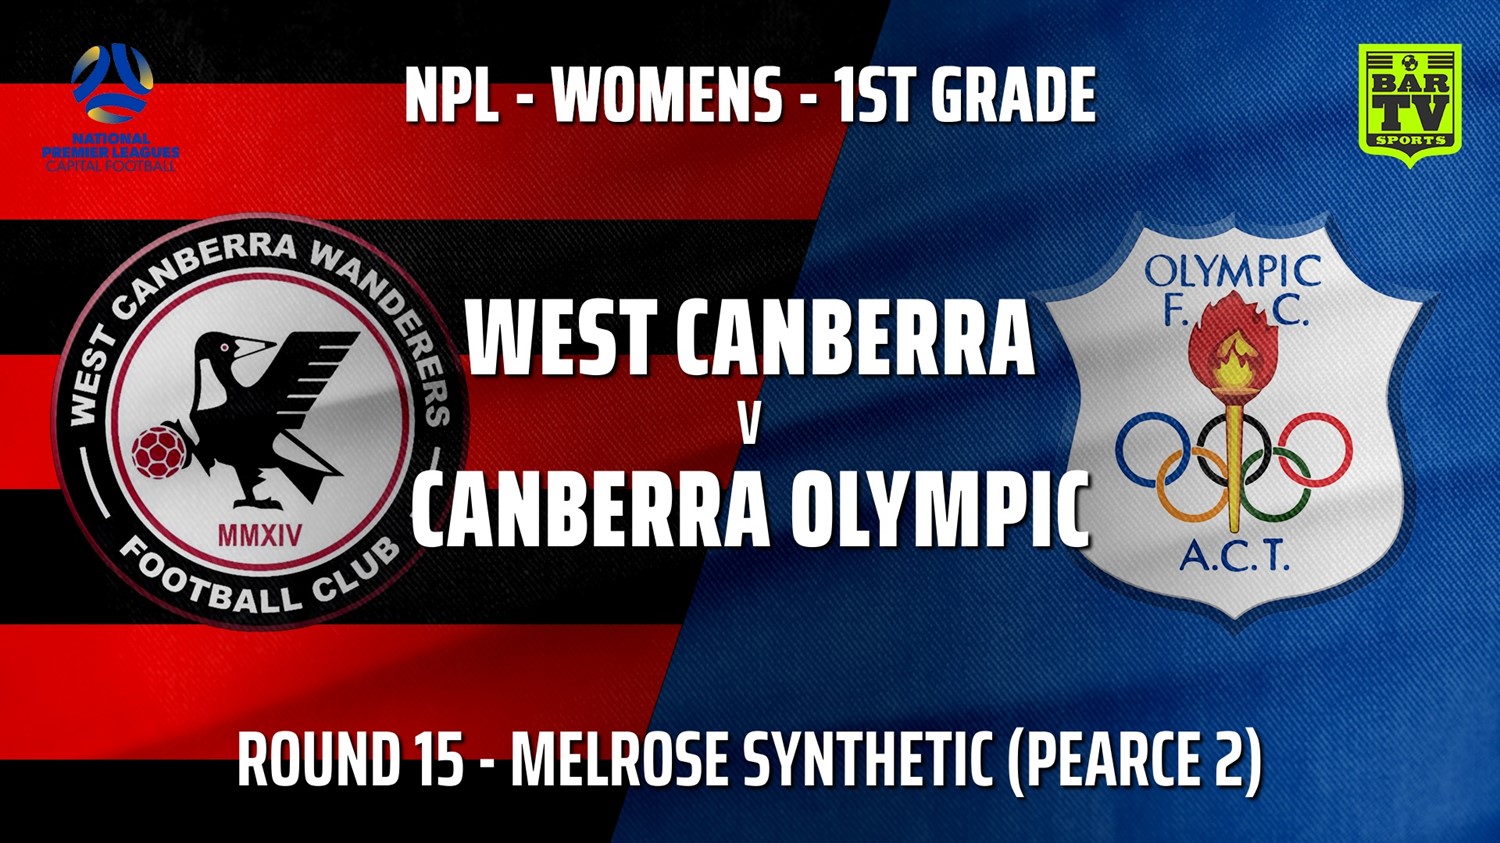 210725-Capital Womens Round 15 - West Canberra Wanderers FC (women) v Canberra Olympic FC (women) Slate Image